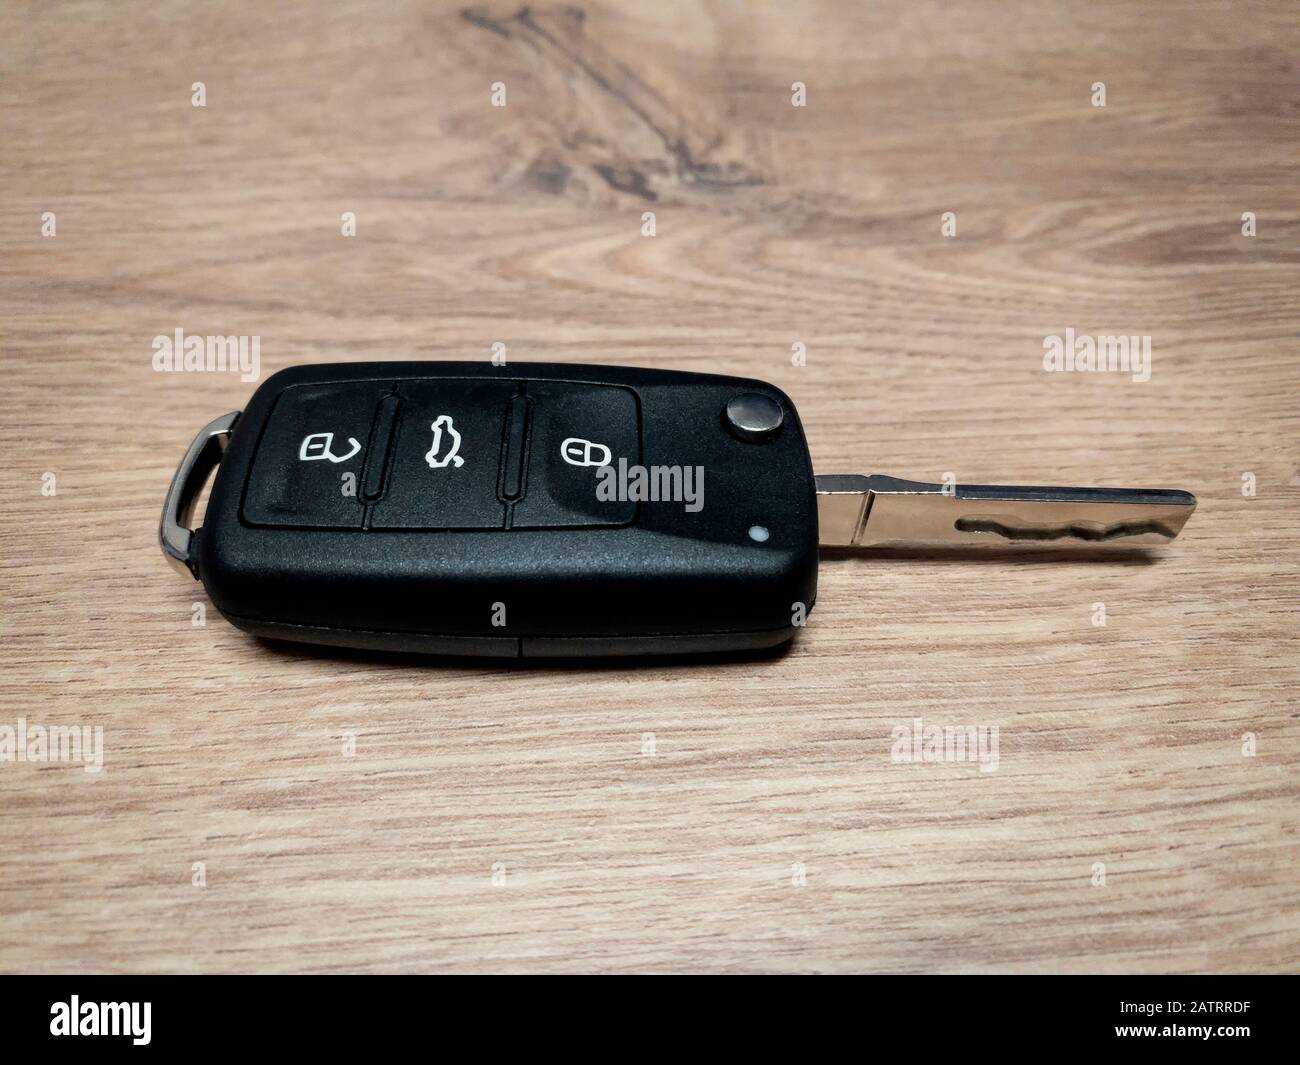 New remote car key fob on the wooden background locksmith service.- Image Stock Photo